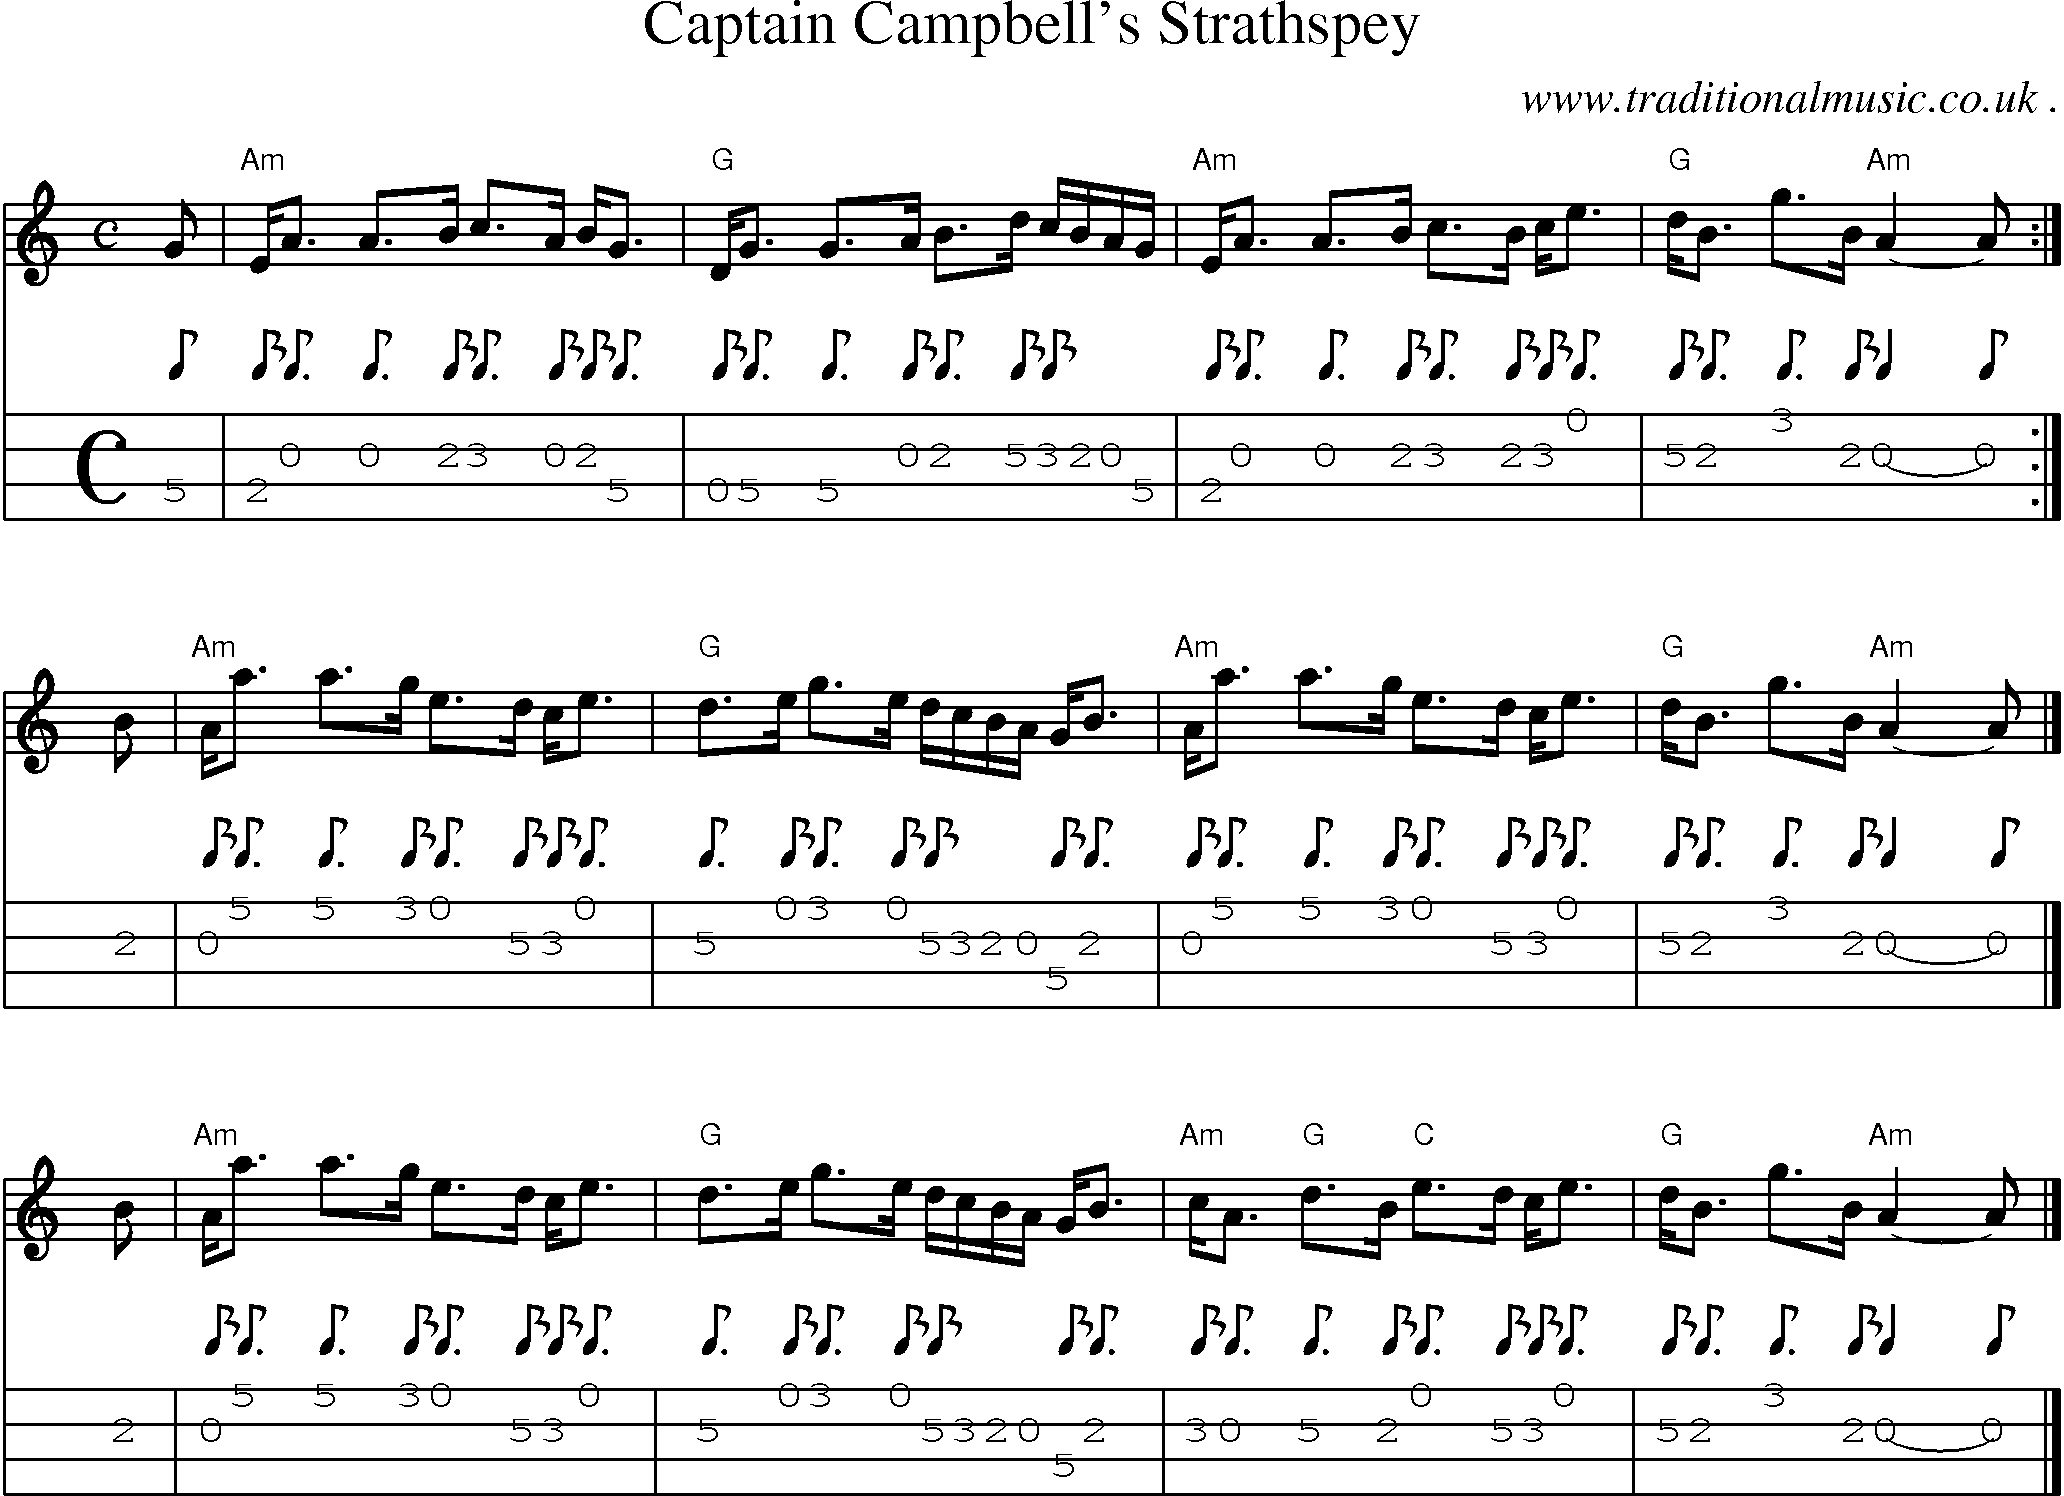 Sheet-music  score, Chords and Mandolin Tabs for Captain Campbells Strathspey